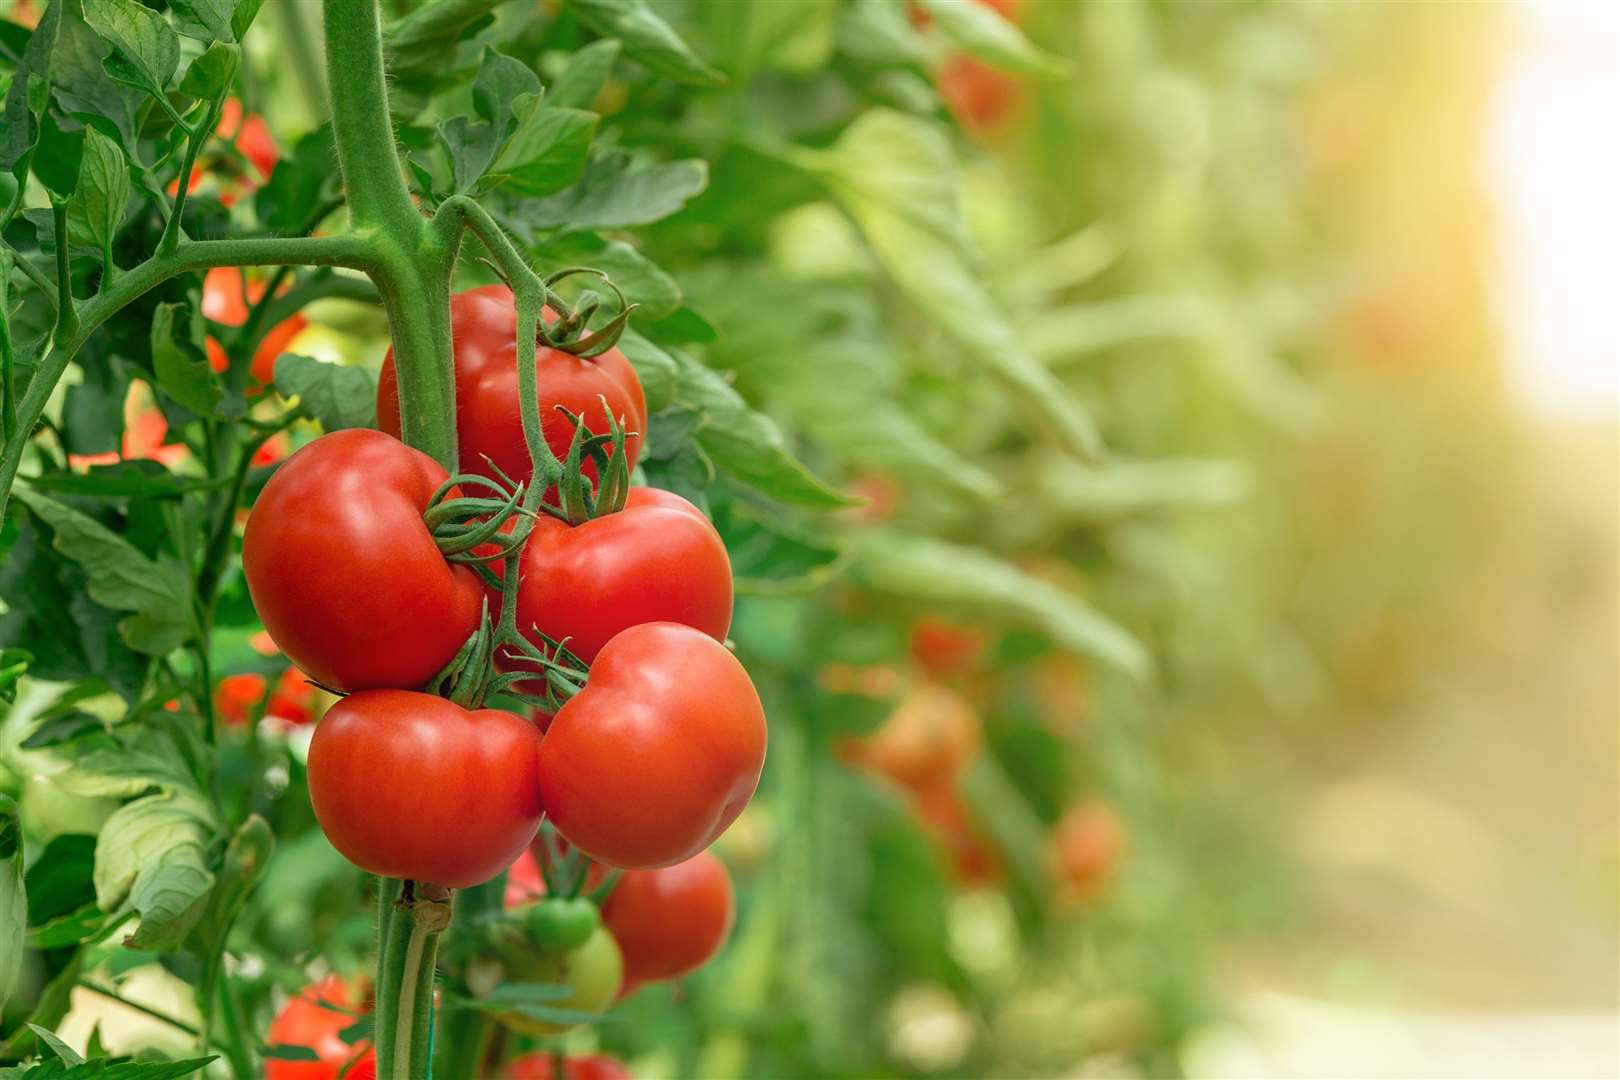 There is currently a shortage of tomatoes in the UK. Image: iStock.